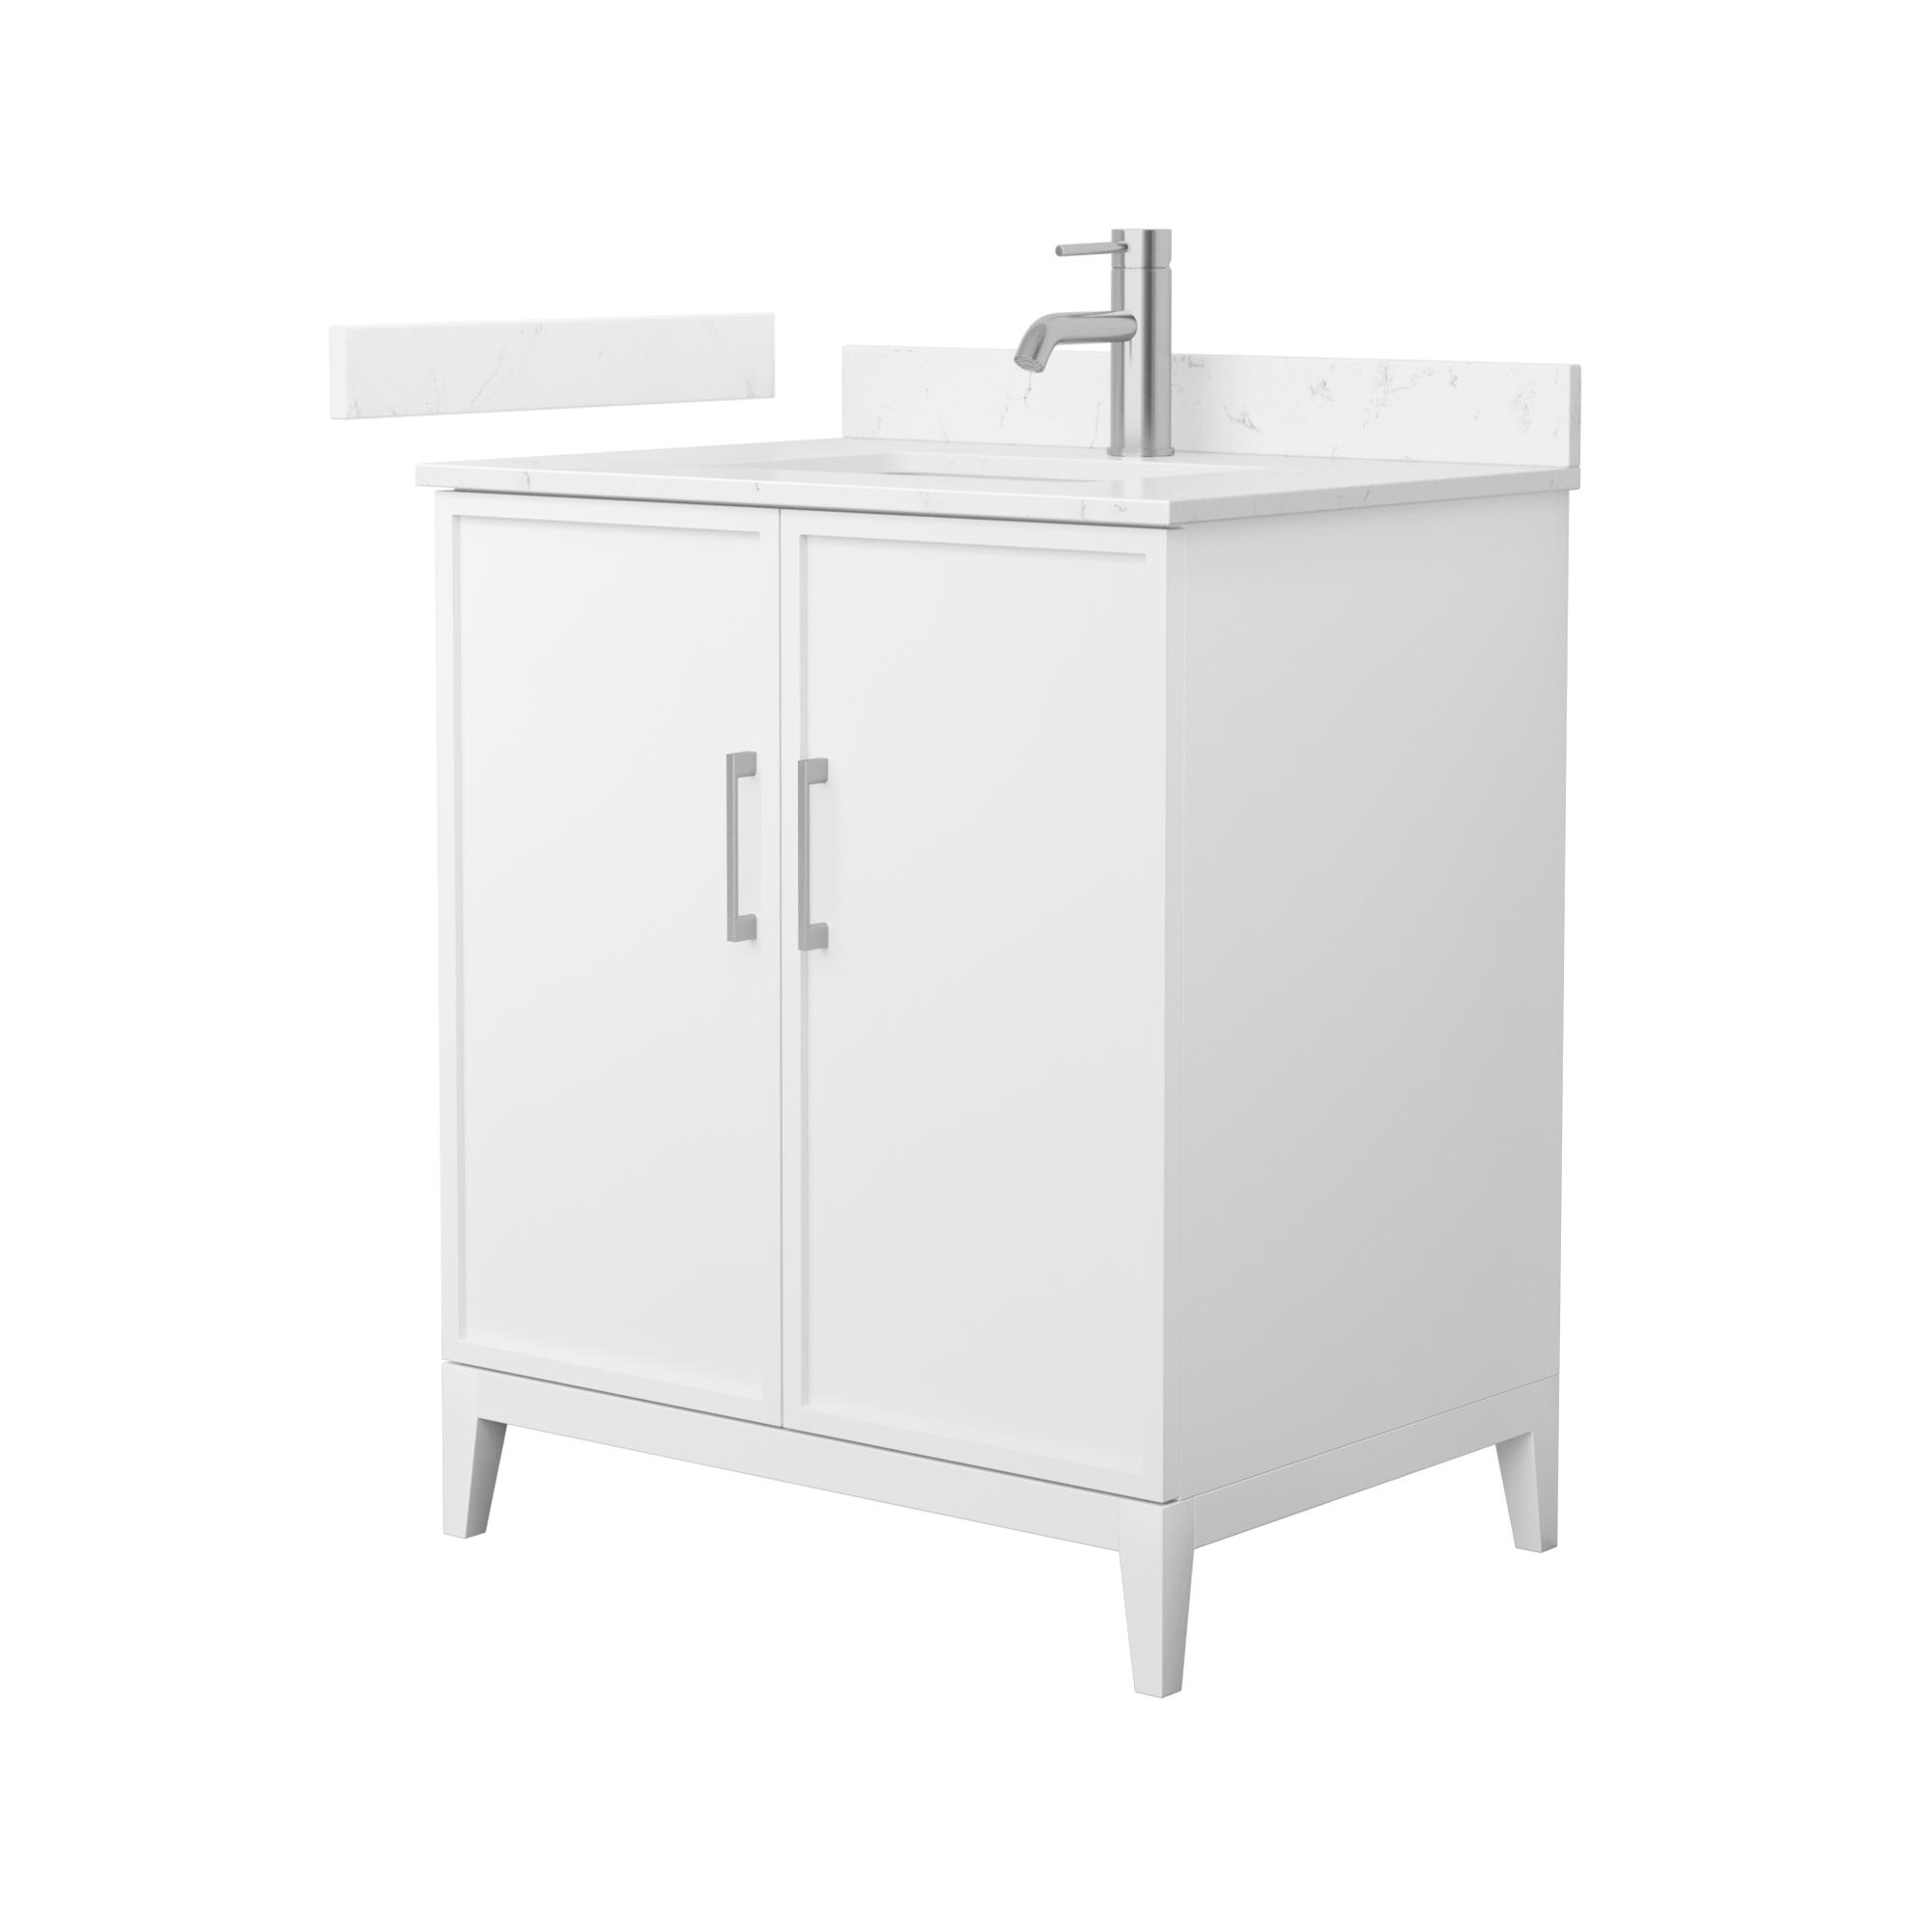 30" Transitional Single Vanity Base in White, 7 Top Options with 2 Hardware Option